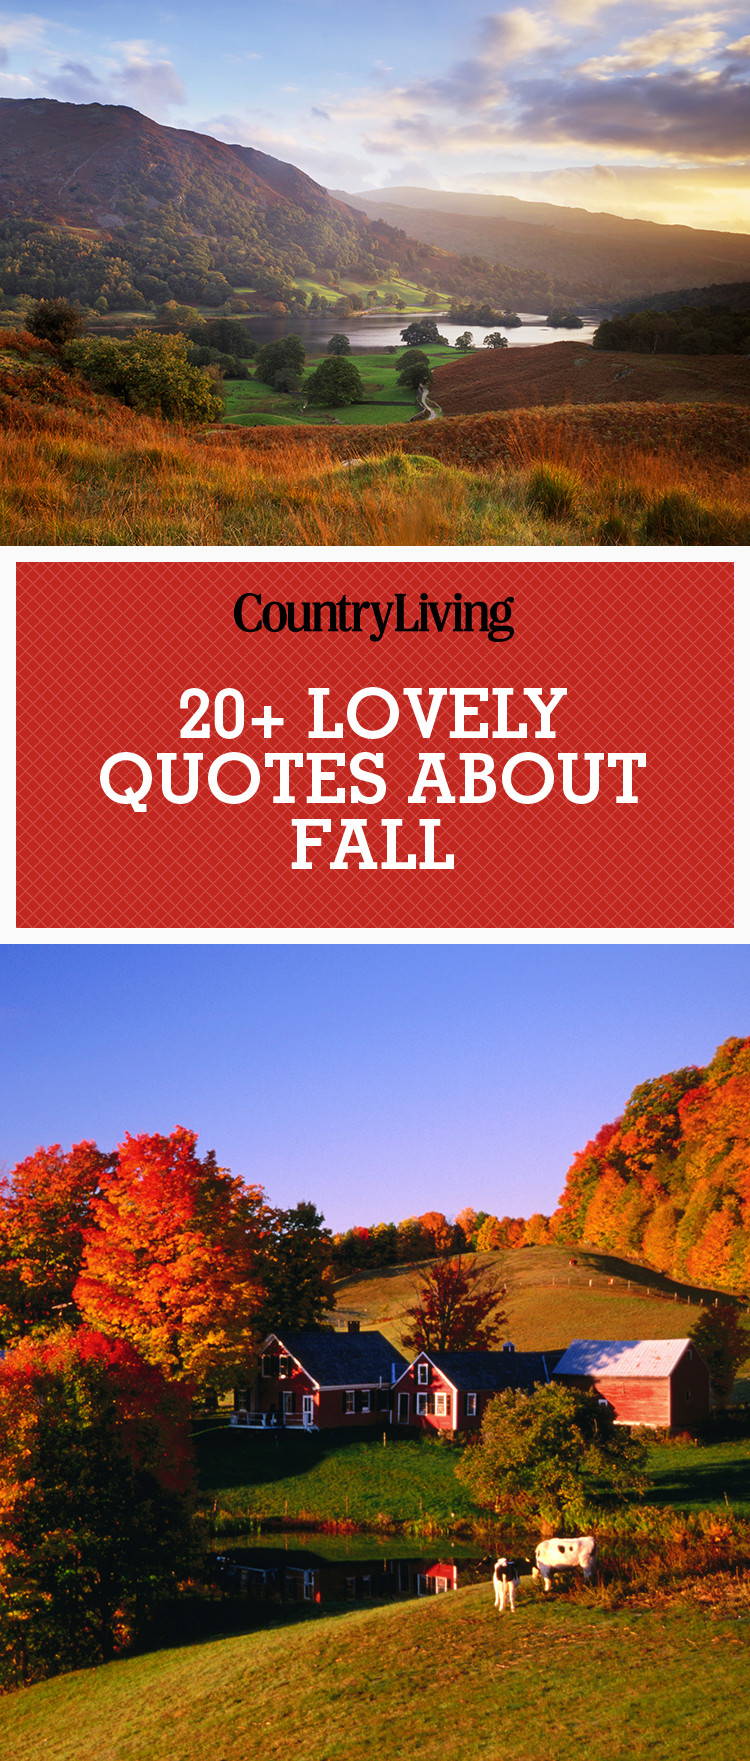 Quotes For Autumn
 25 Fall Season Quotes Best Sayings About Autumn